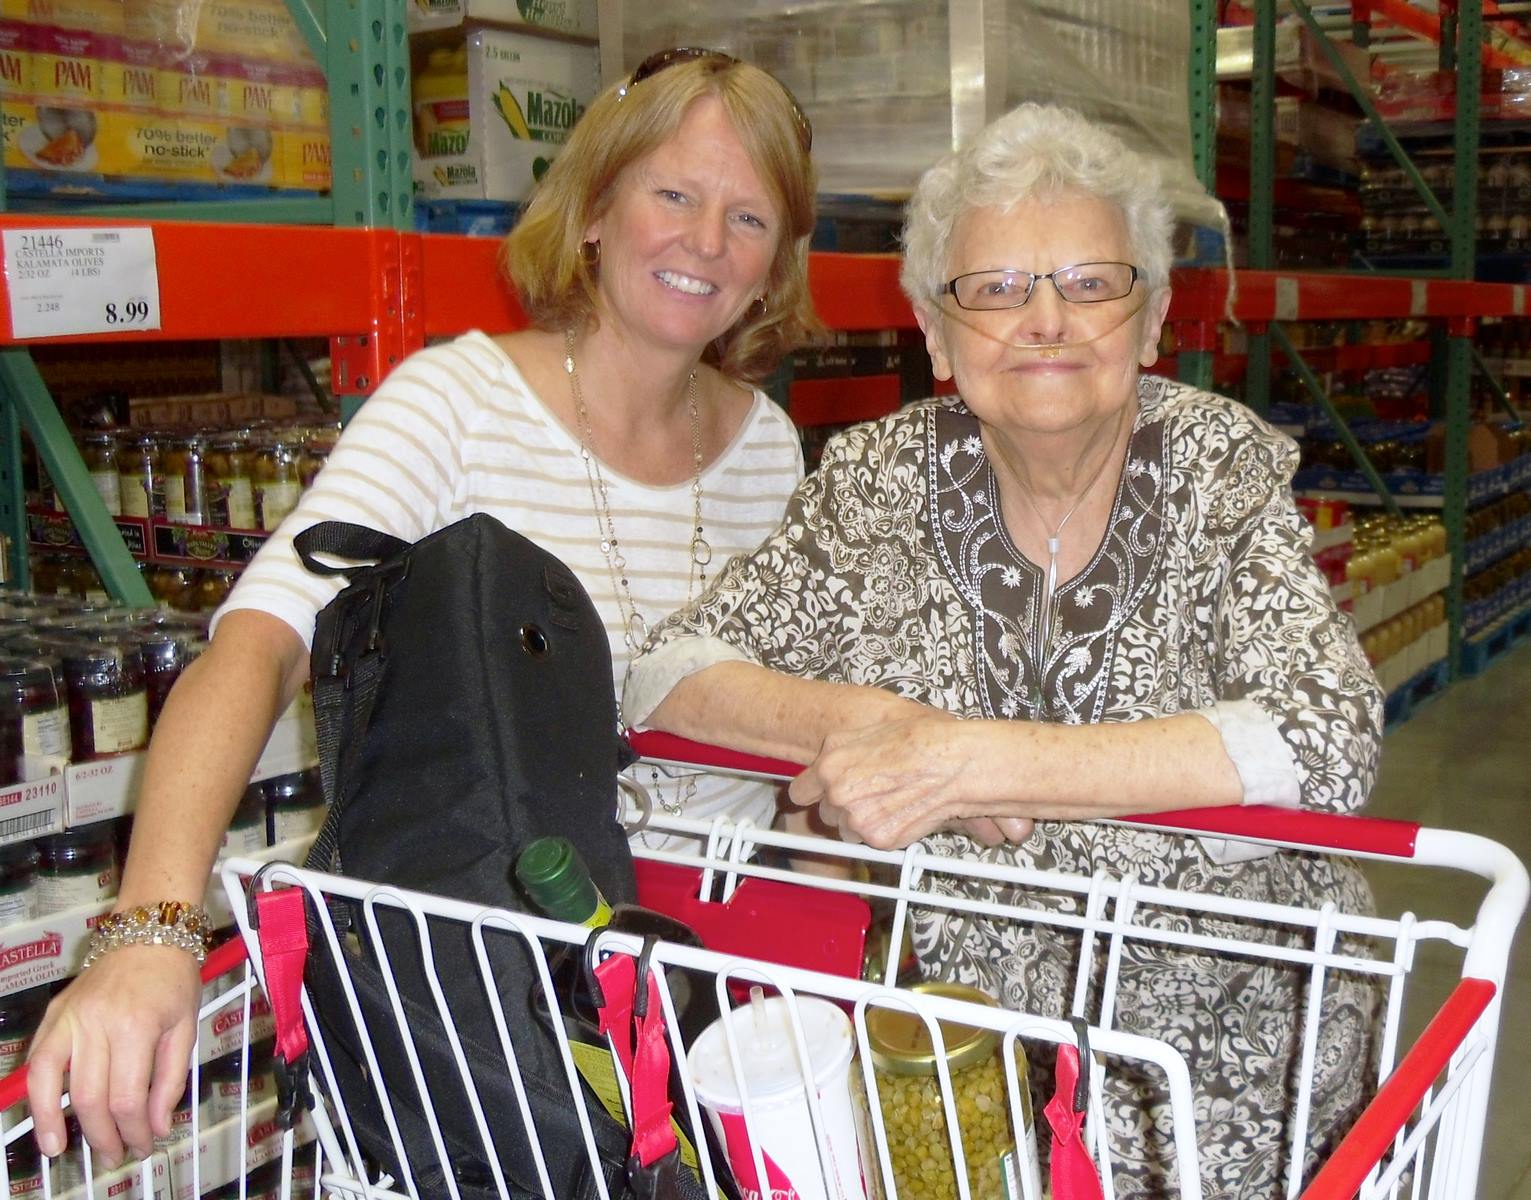 Activity Ideas for Dementia Shopping in the Early Stages